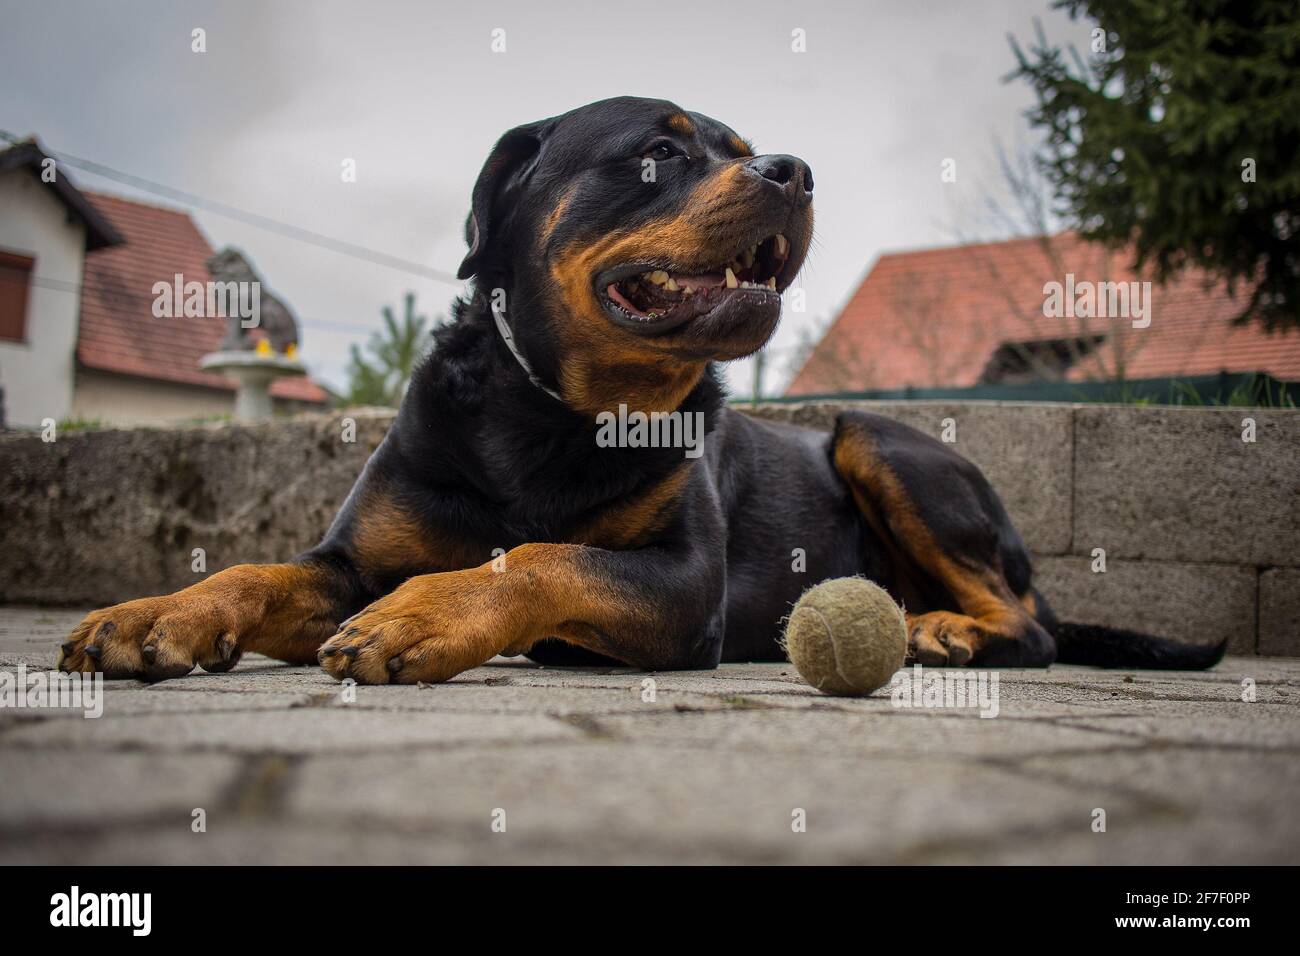 Cute black and brown Rottweiler dog is lying on the tiled concrete floor and looking away from the camera. A tennis ball is lying next to the dog. Stock Photo